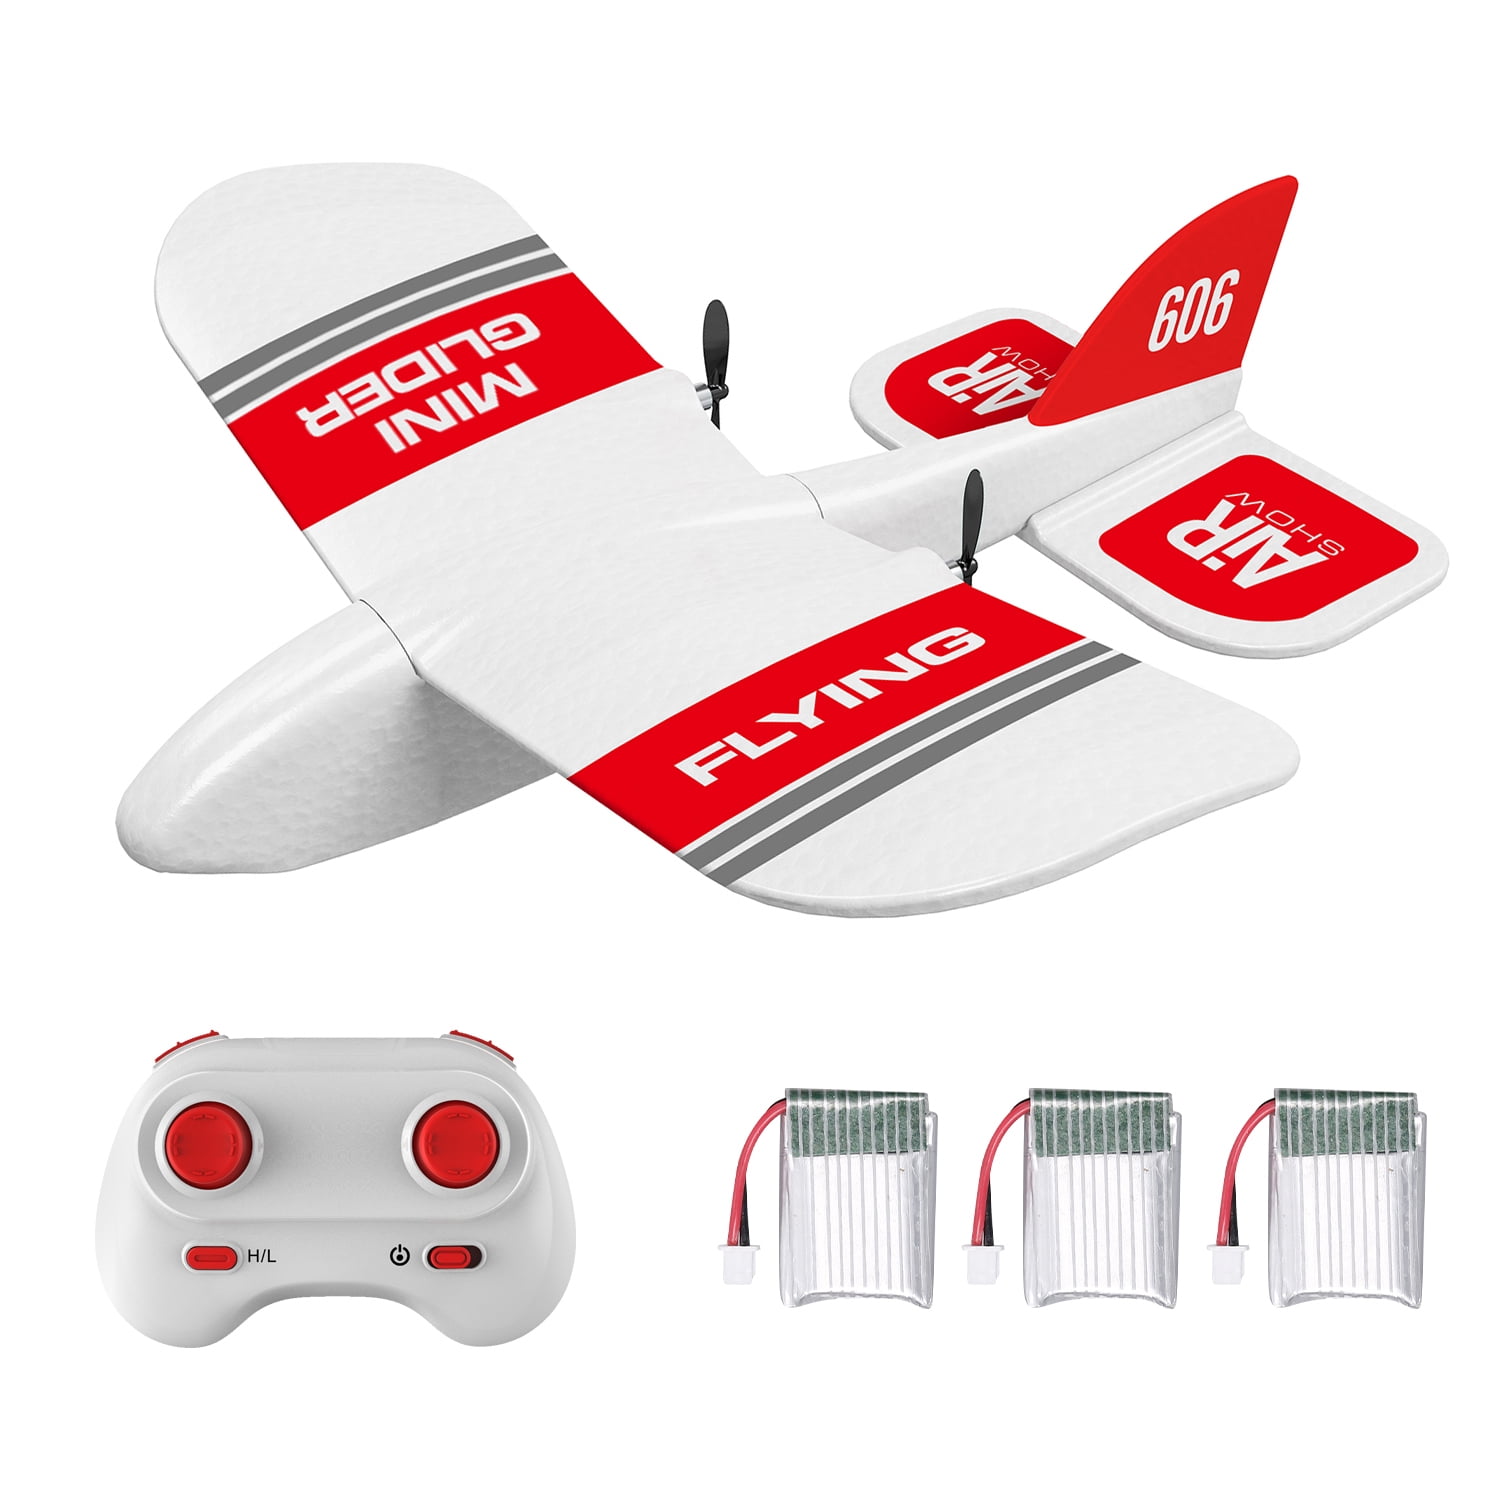 Details about   RC Remote Control Helicopter Plane Glider Airplane EPP FX-819 2.4Ghz 3CH RTF US 